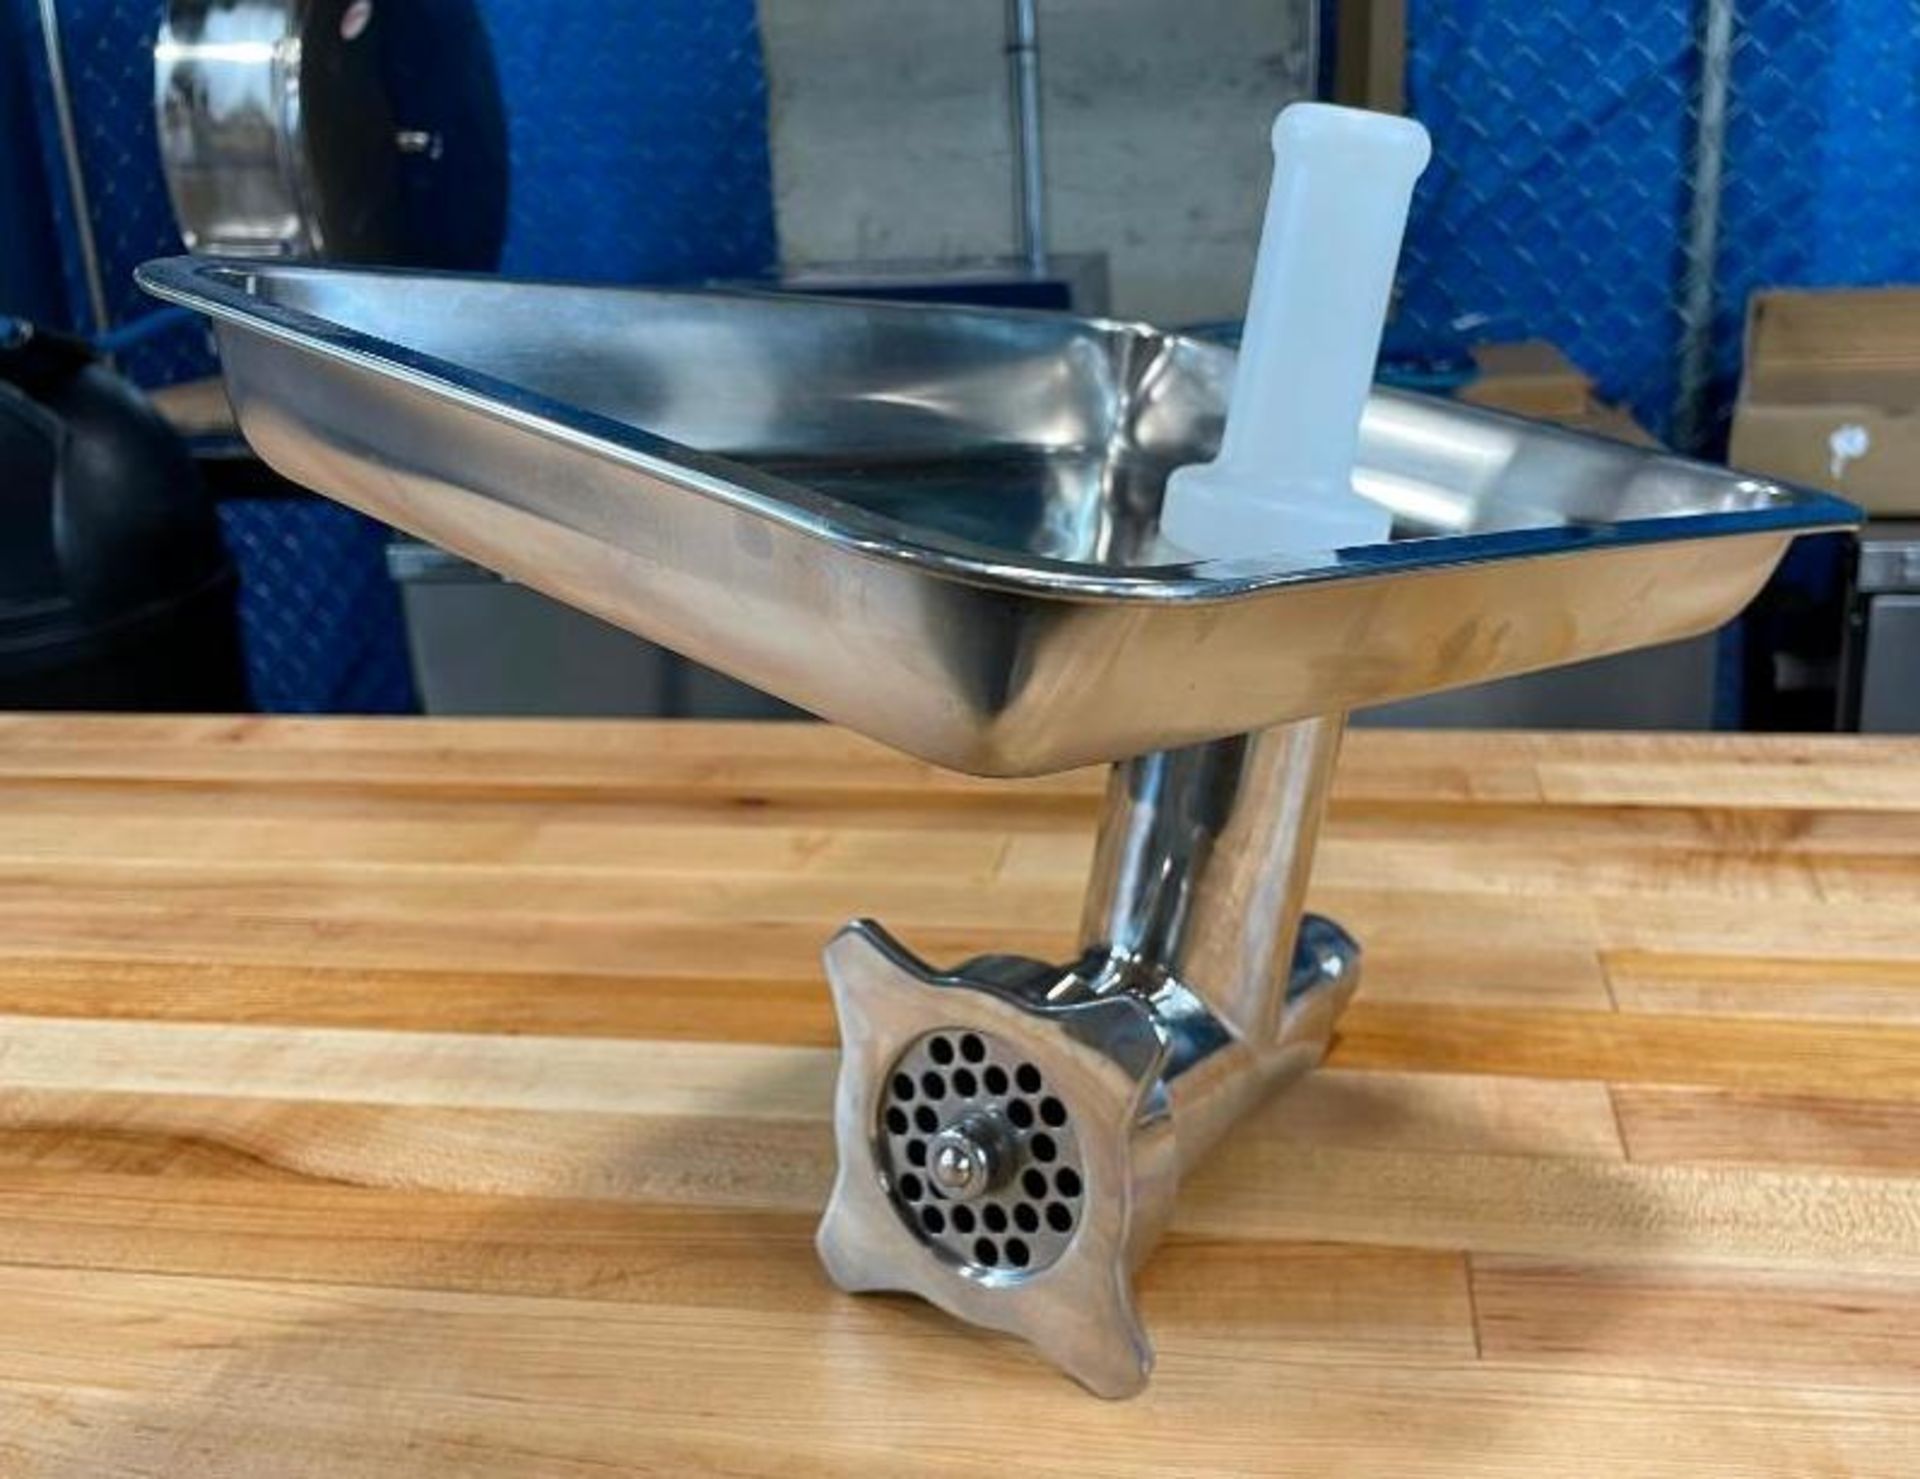 ALL STAINLESS #12 MEAT GRINDER ATTACHMENT FOR MIXERS